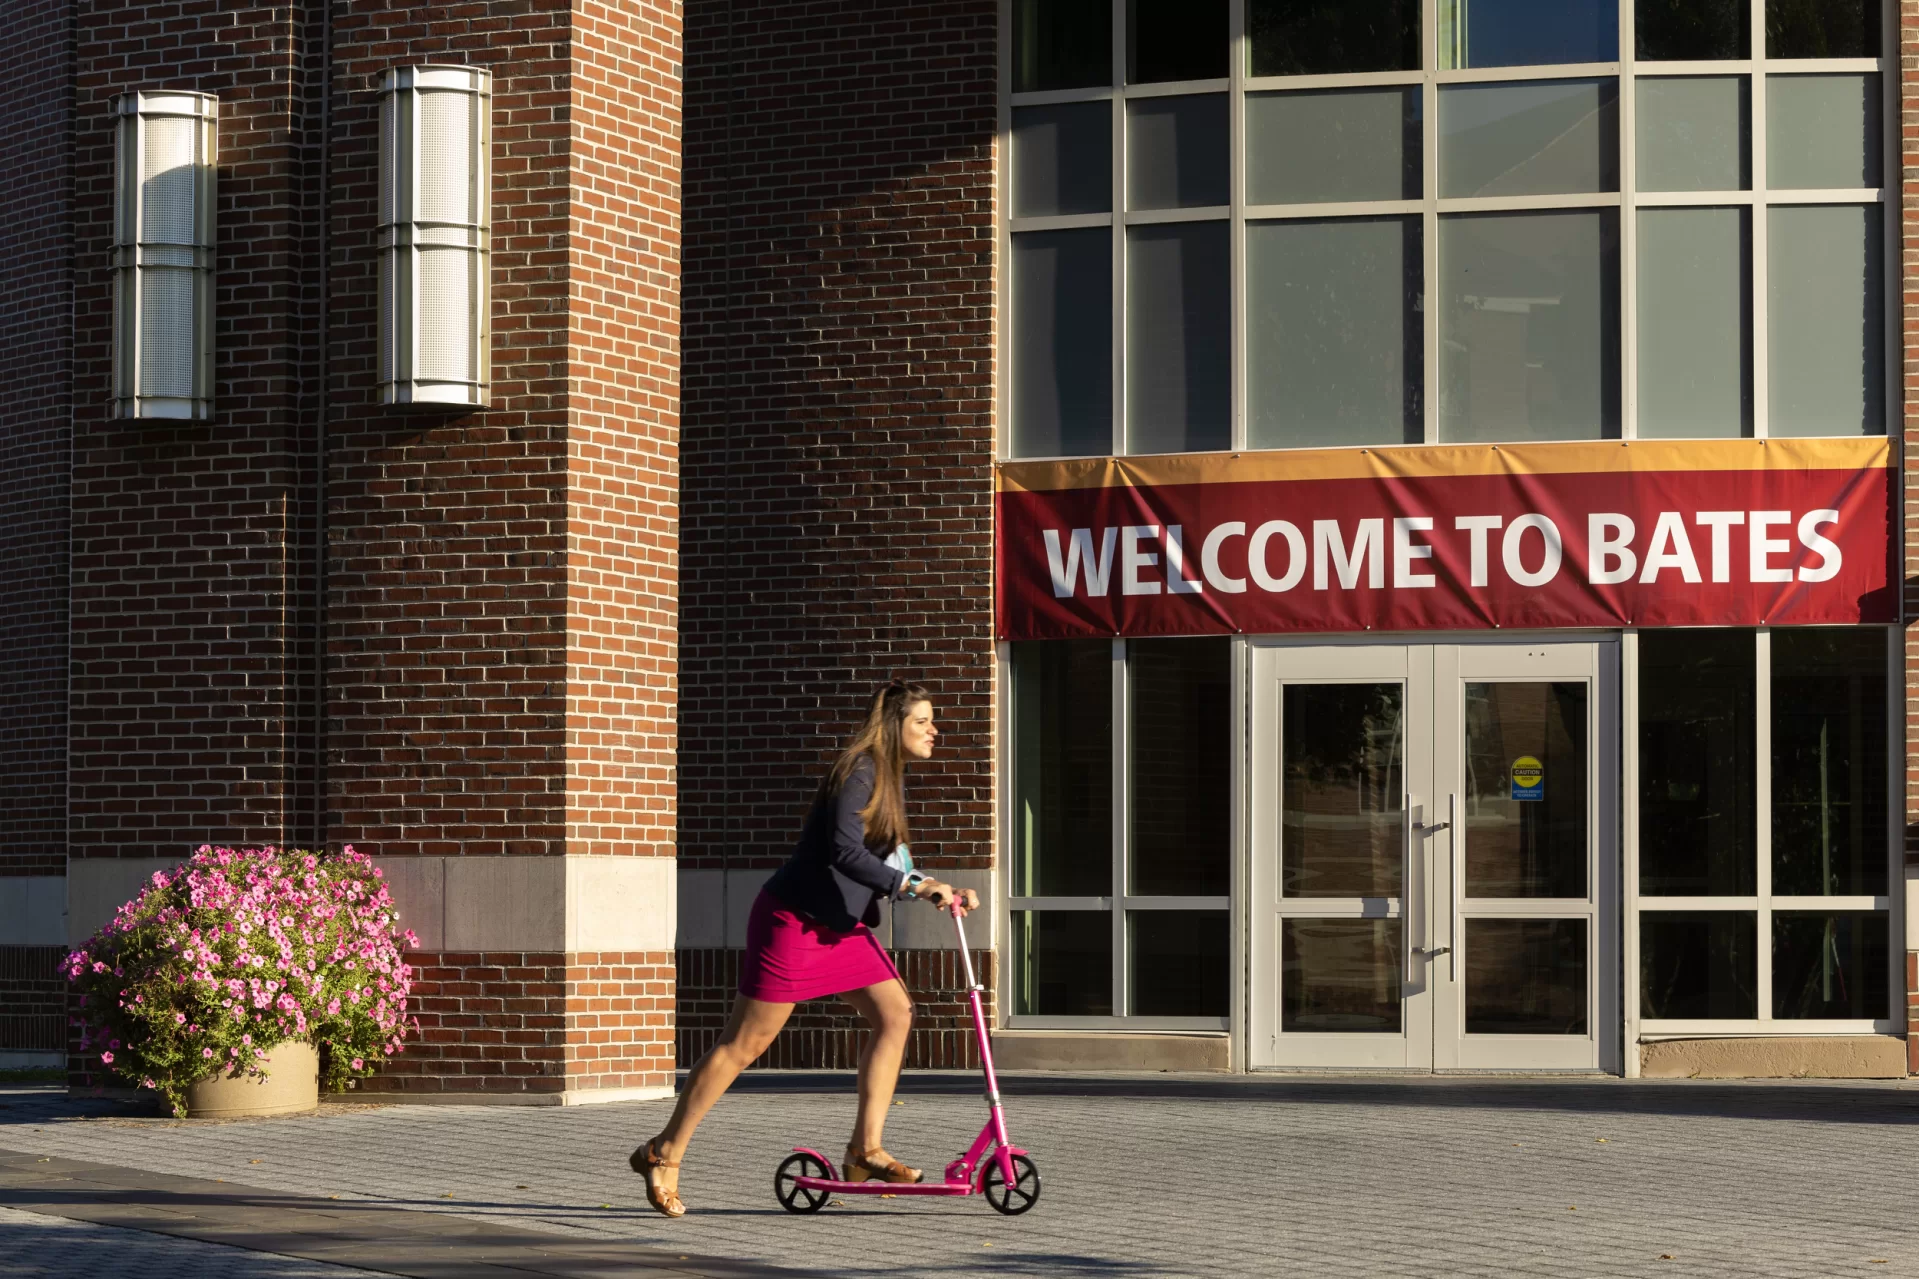 Images of Opening Day for the Class of 2027 at Bates College on Aug. 31, 2023.